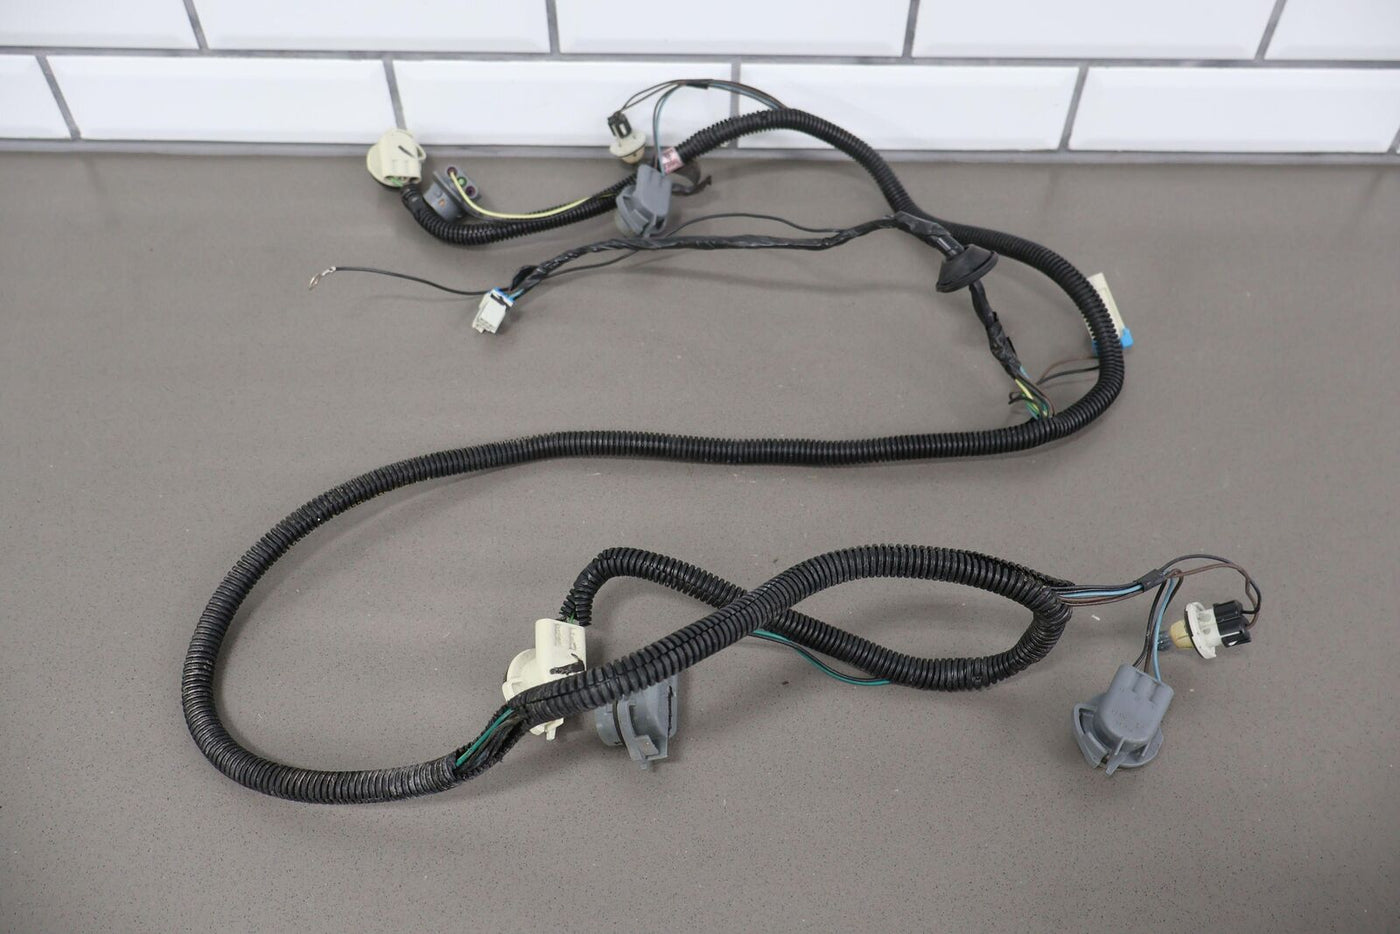 2002 Chevy Camaro OEM Rear Tail Light Wiring Harness (Tested)